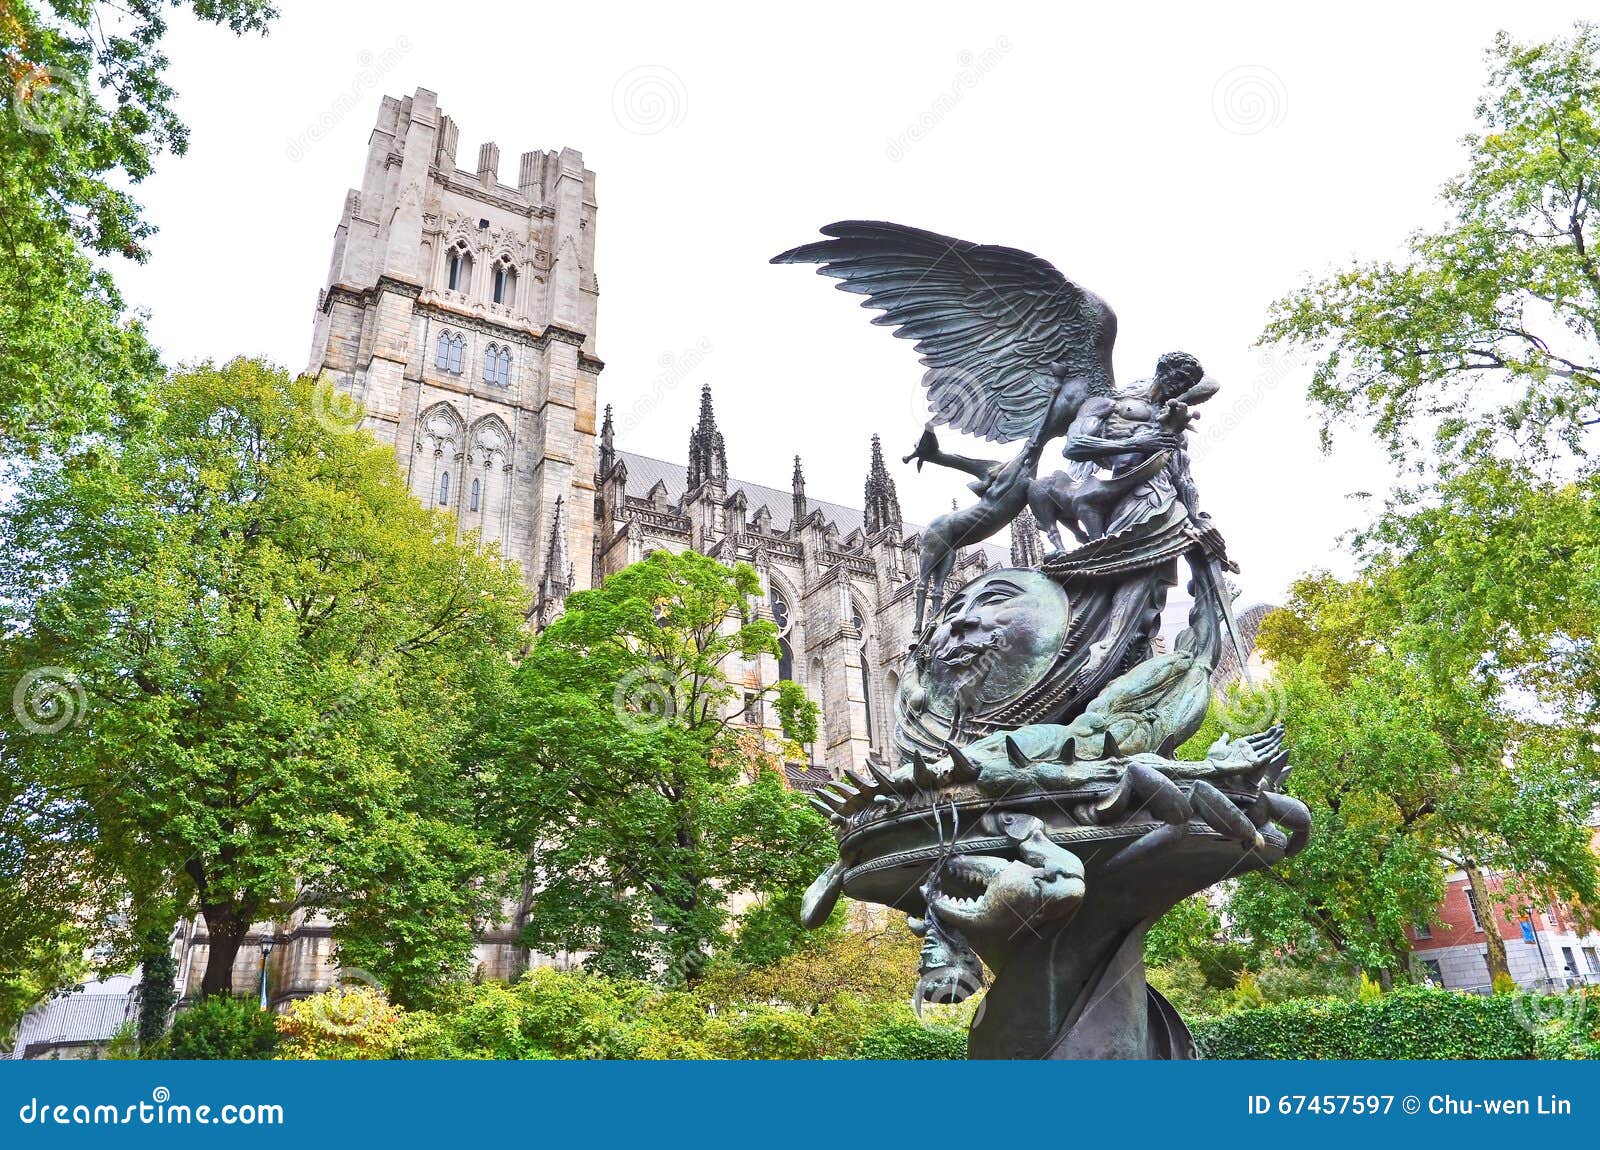 cathedral of saint john the divine in new york city.